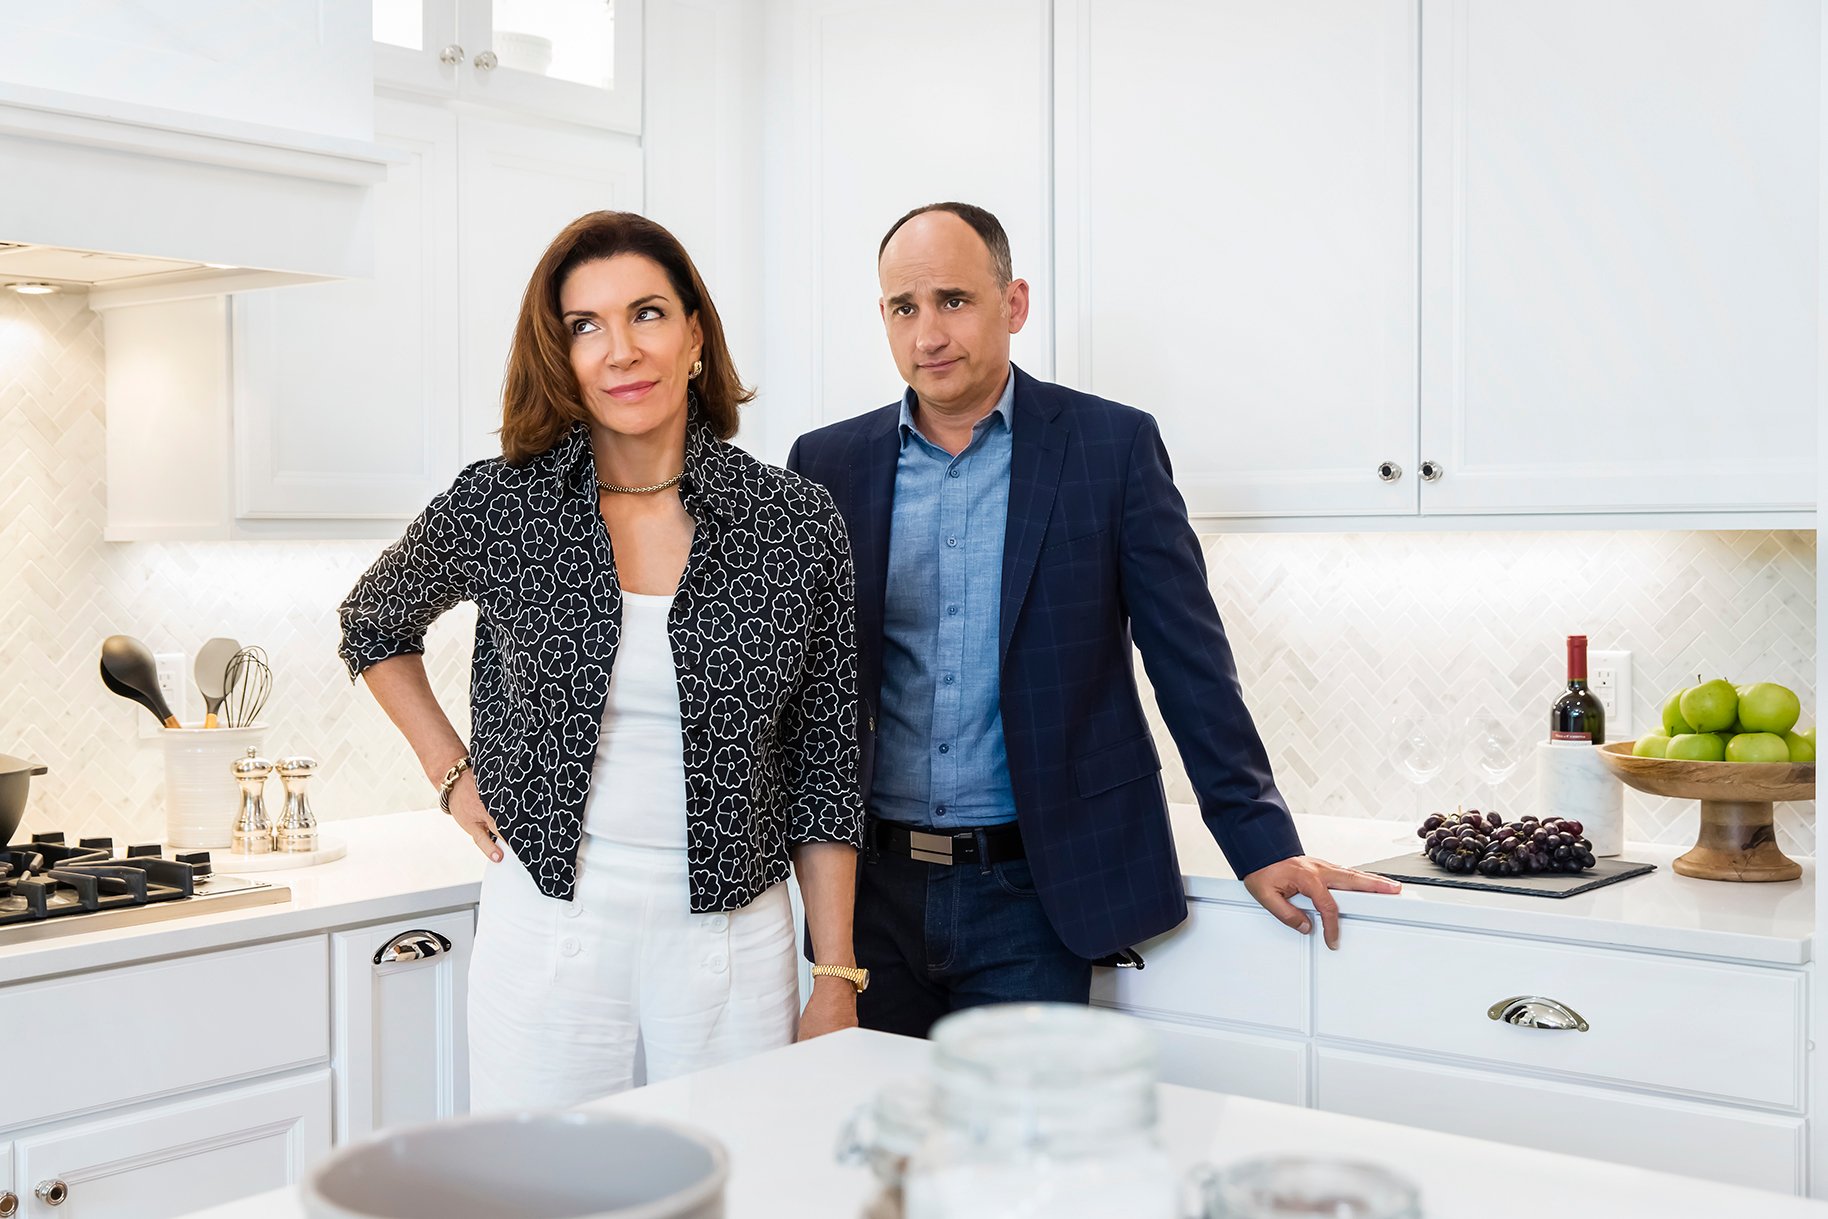 Hilary Farr and David Visentin standing in a white kitchen on 'Love It Or List It'